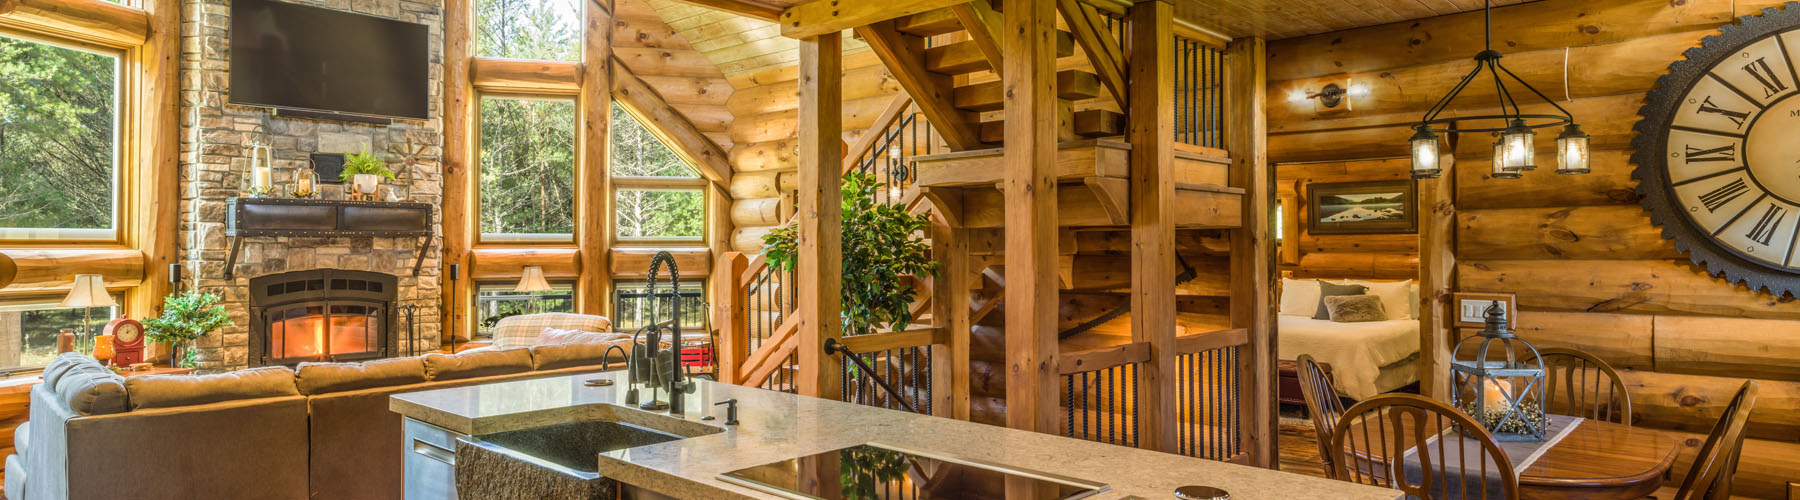 Log And Timber Home 2124AL - Lofted